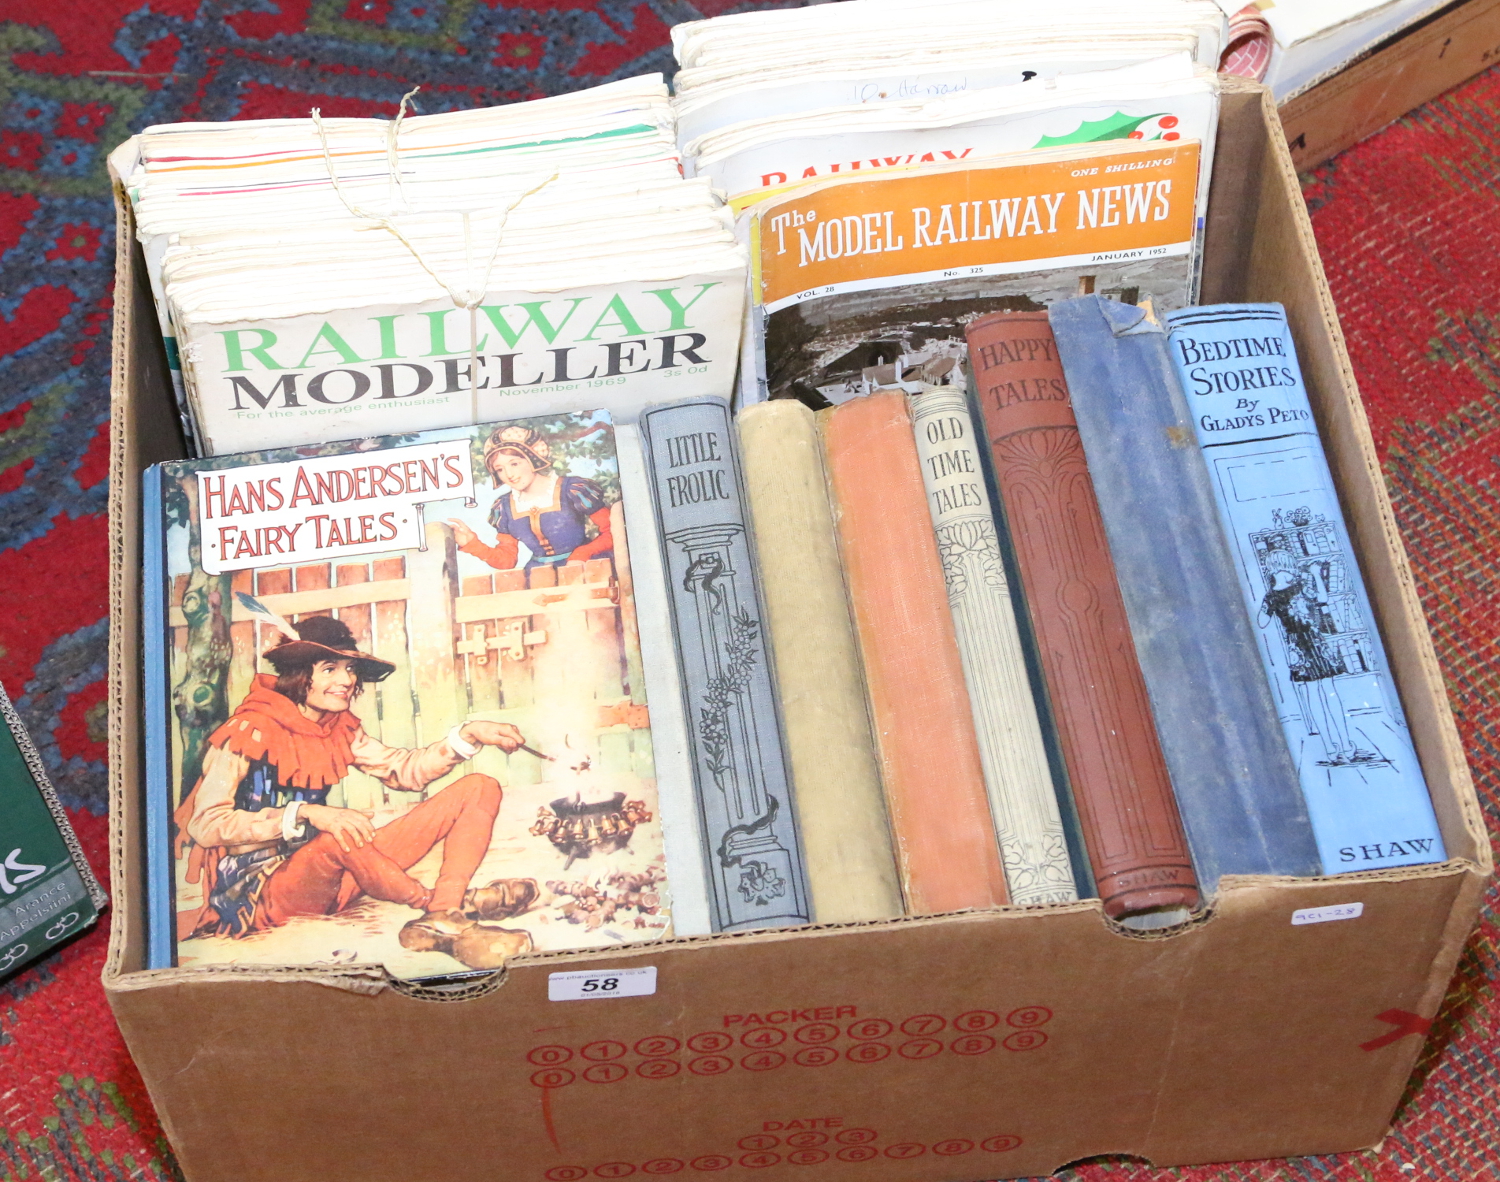 A collection of old hardback childrens books along with a collection of model railway magazines.